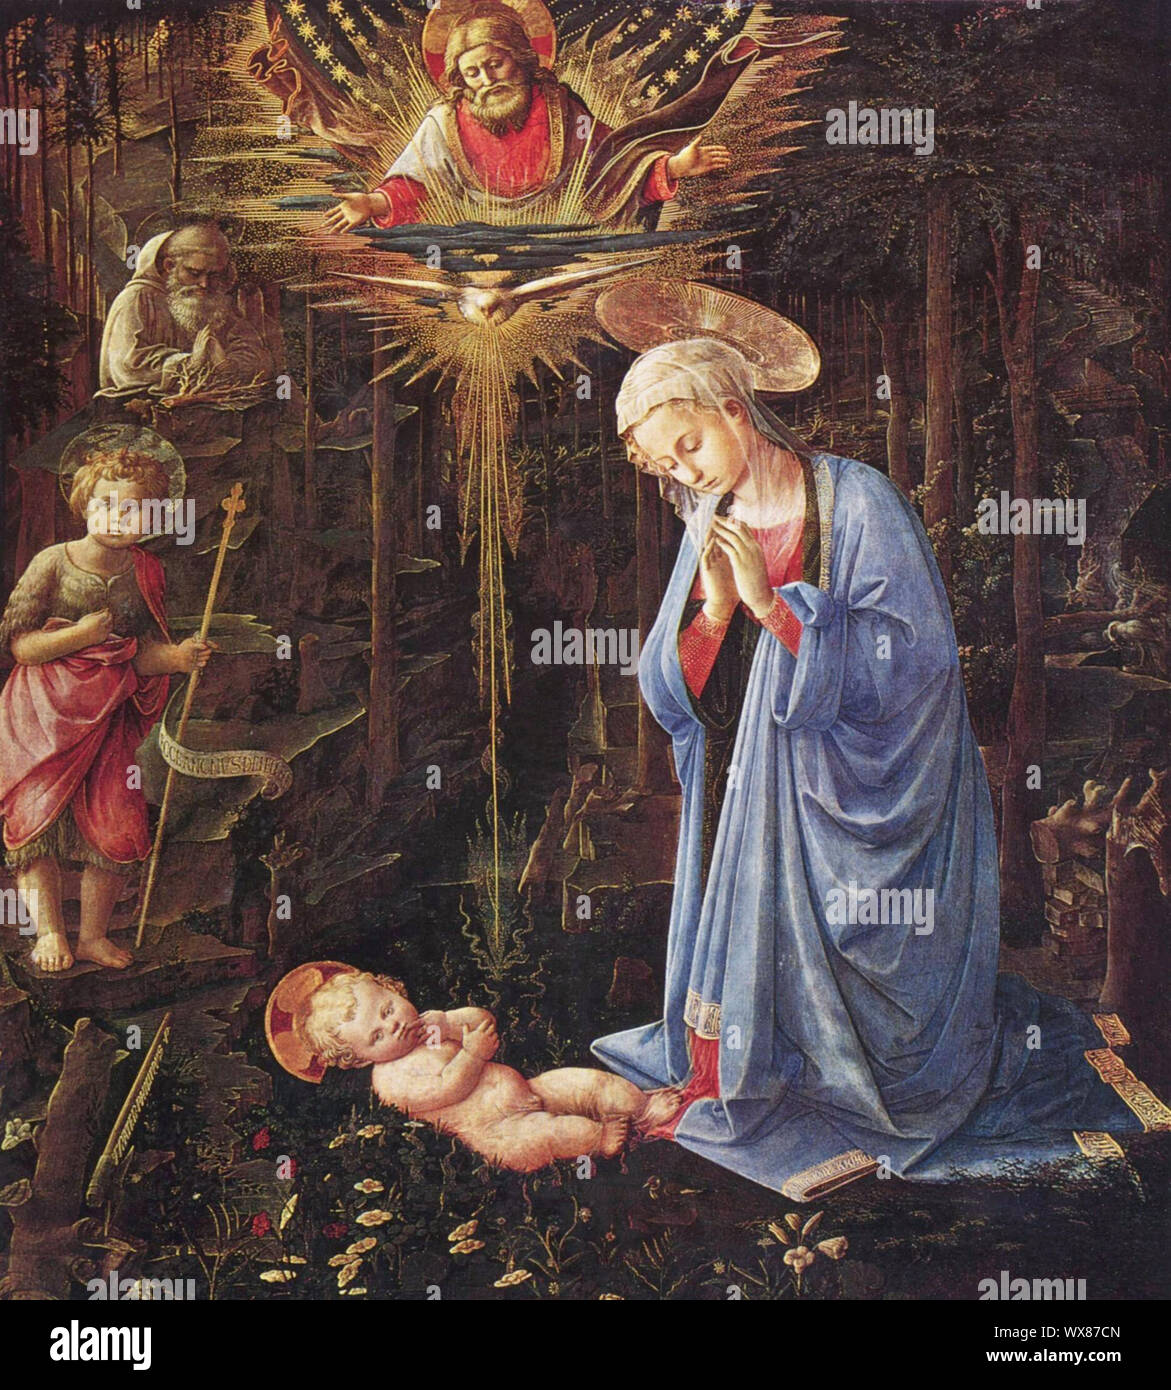 Adoration in the Forest, circa 1459 Stock Photo